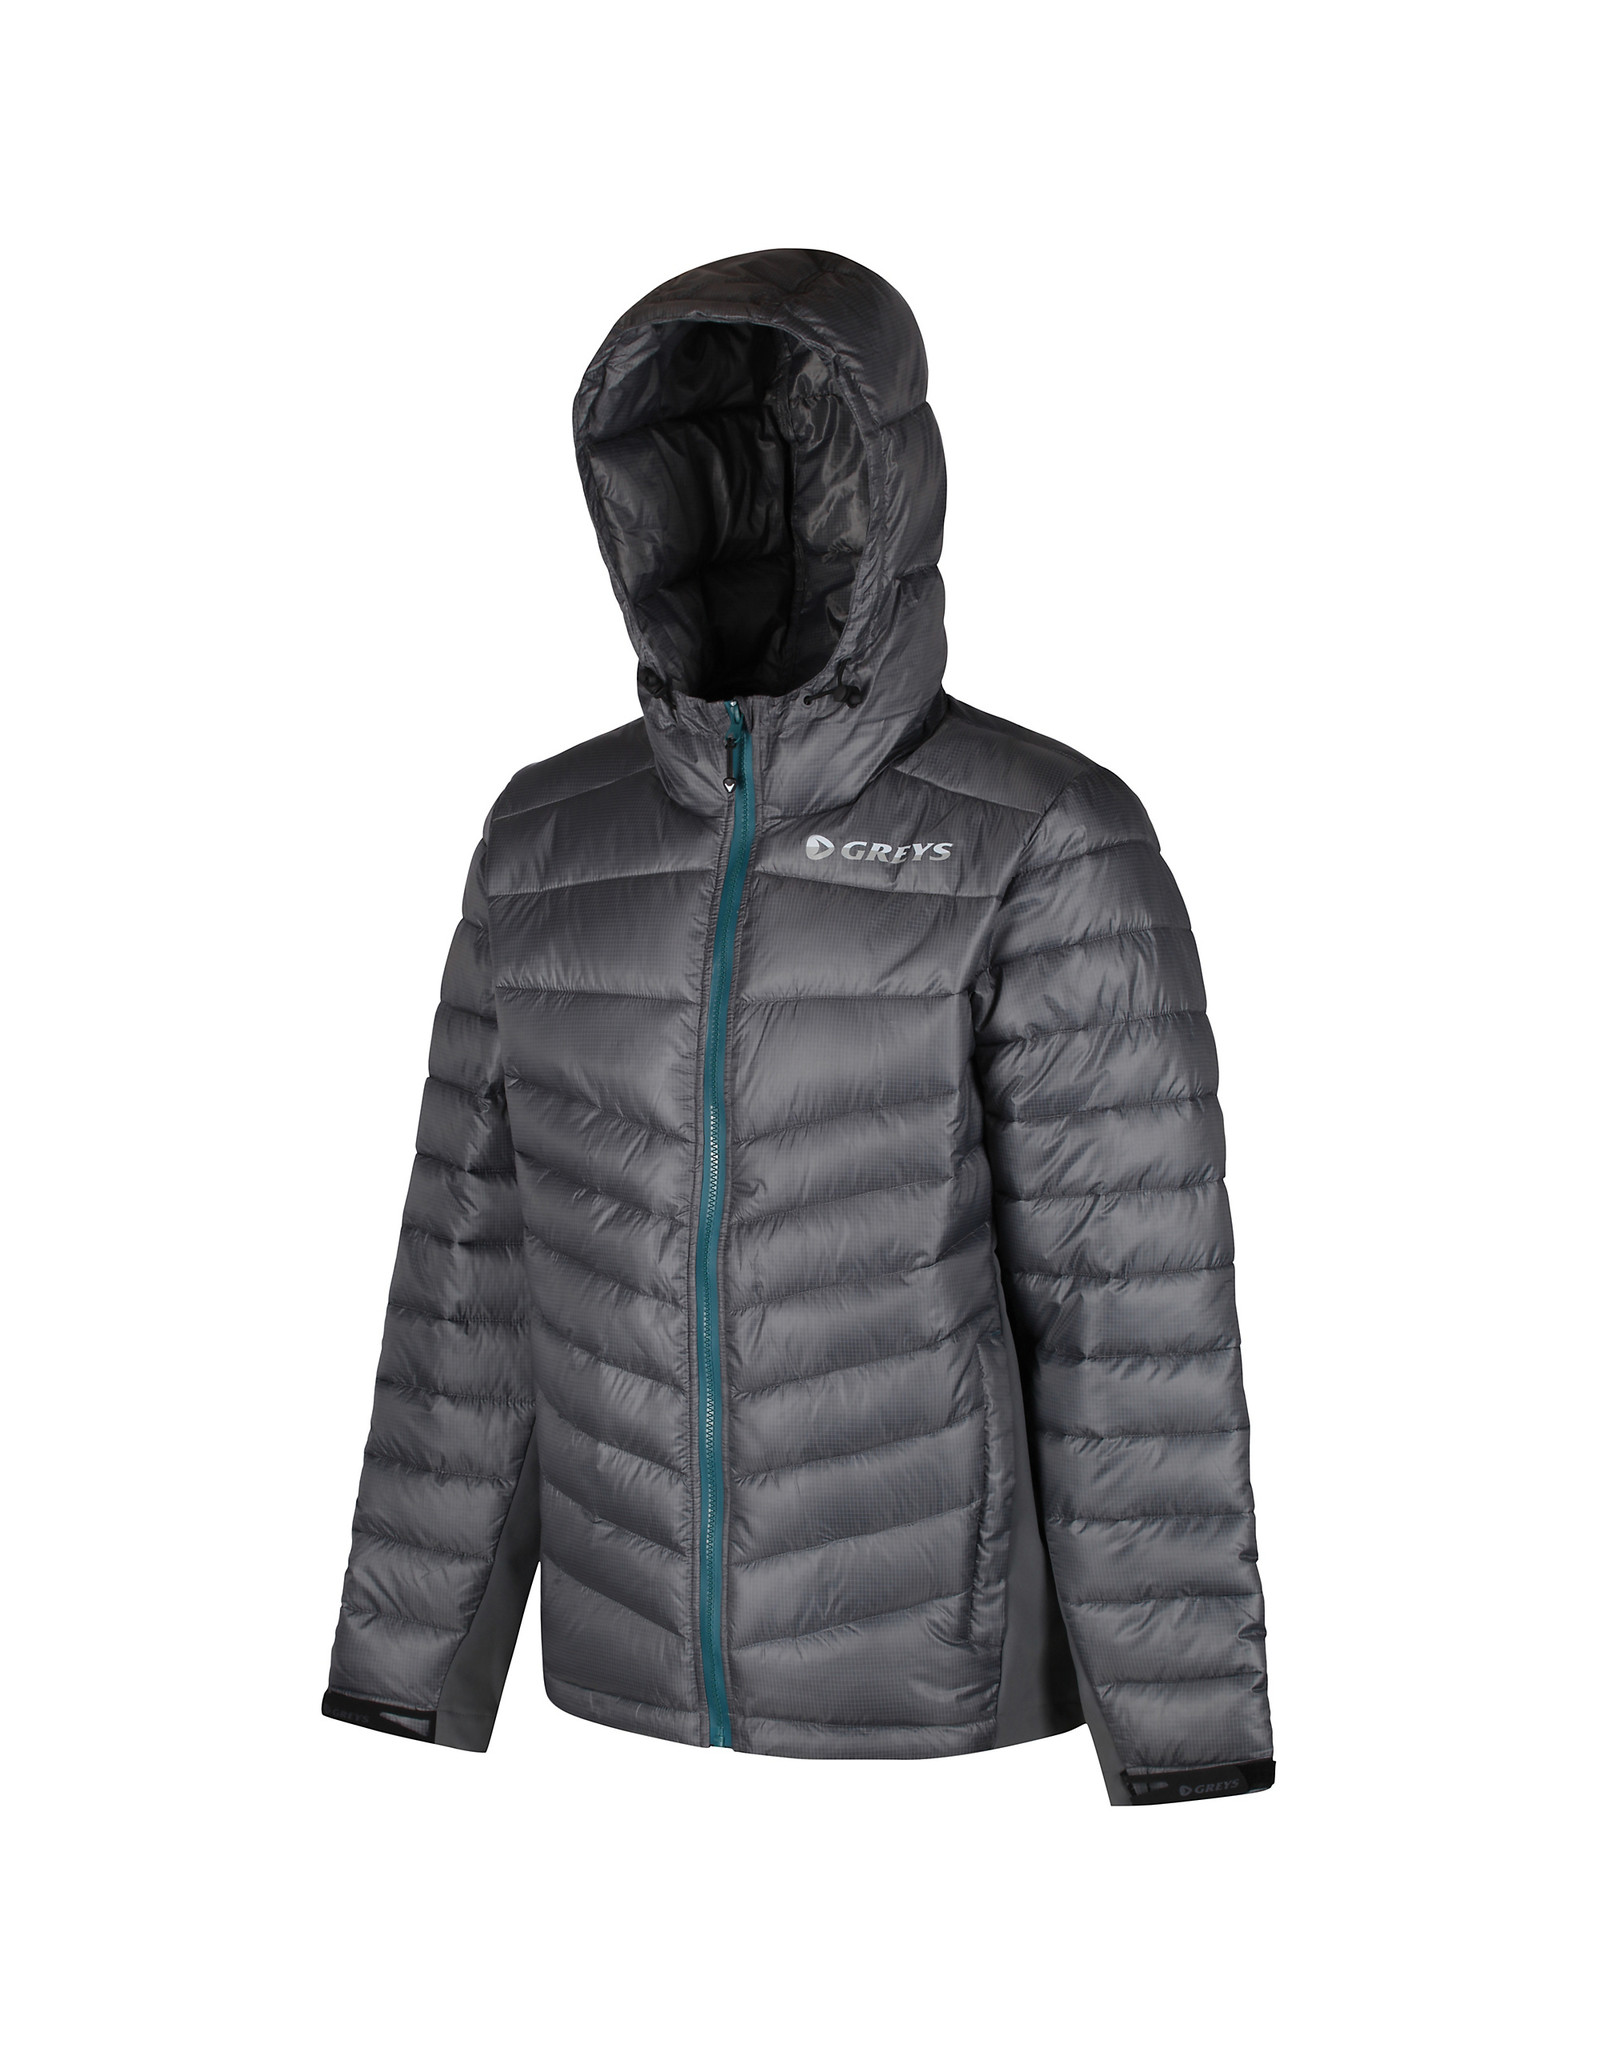 Greys Greys Micro Quilted Jacket